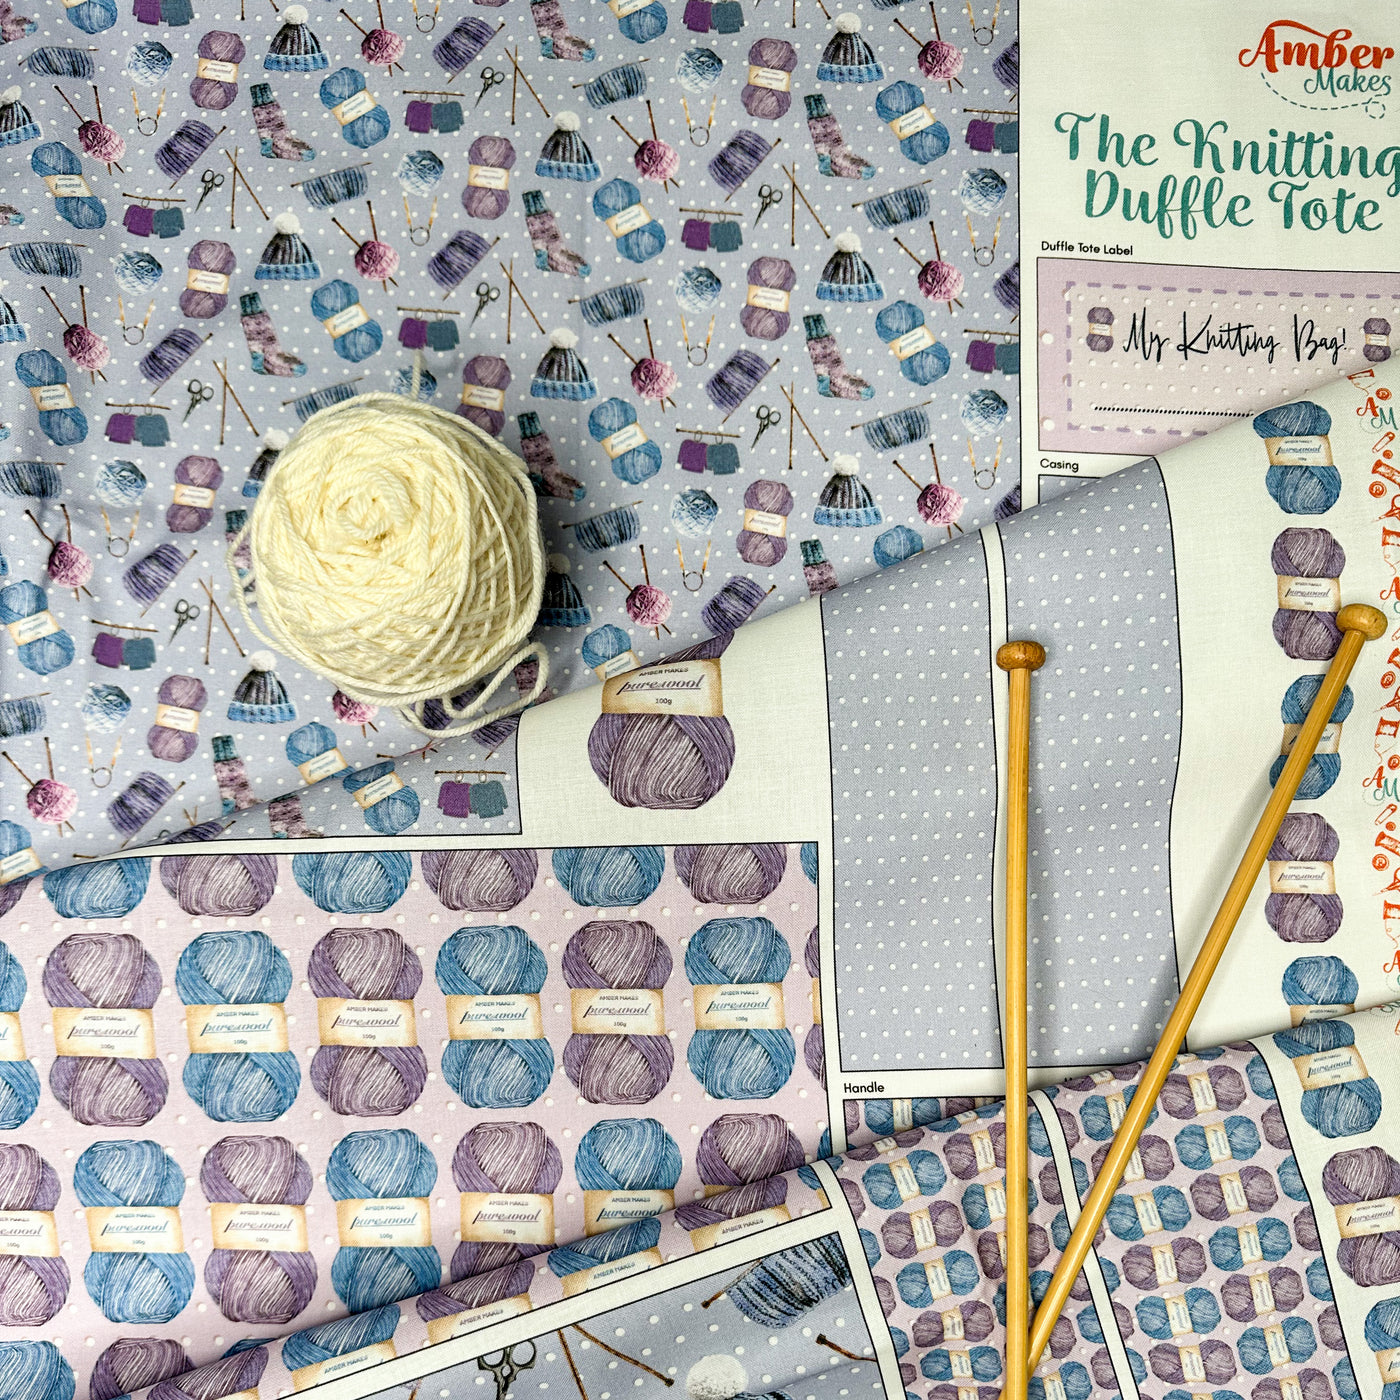 The Knitting Duffle Tote Sewing Kit - Cut and sew fabric Panel and Instructions kit Amber Makes